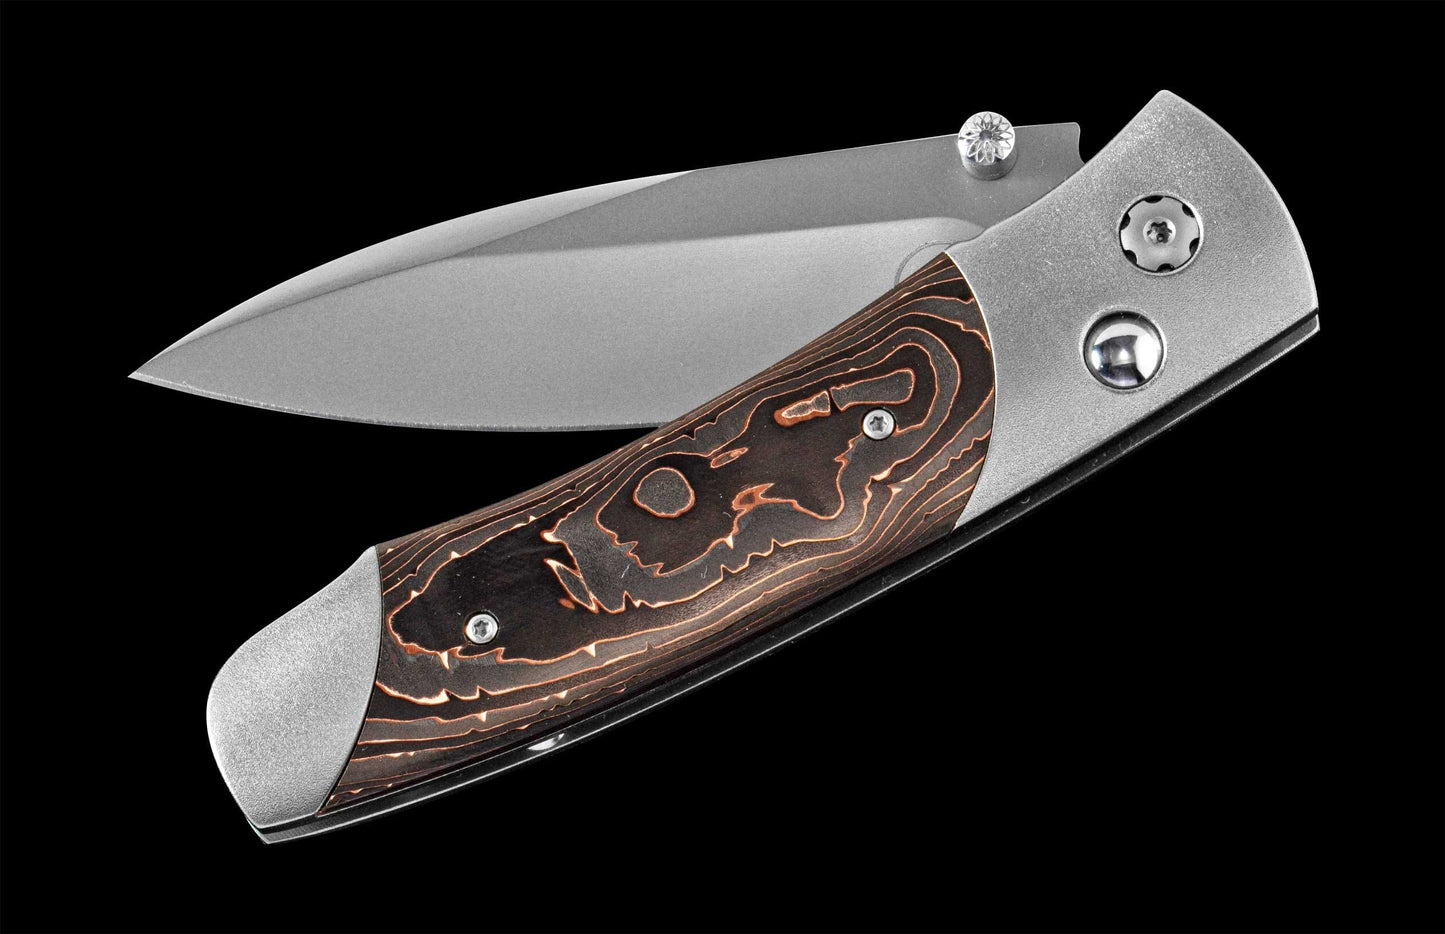 William Henry’S 'A200-6' Knife